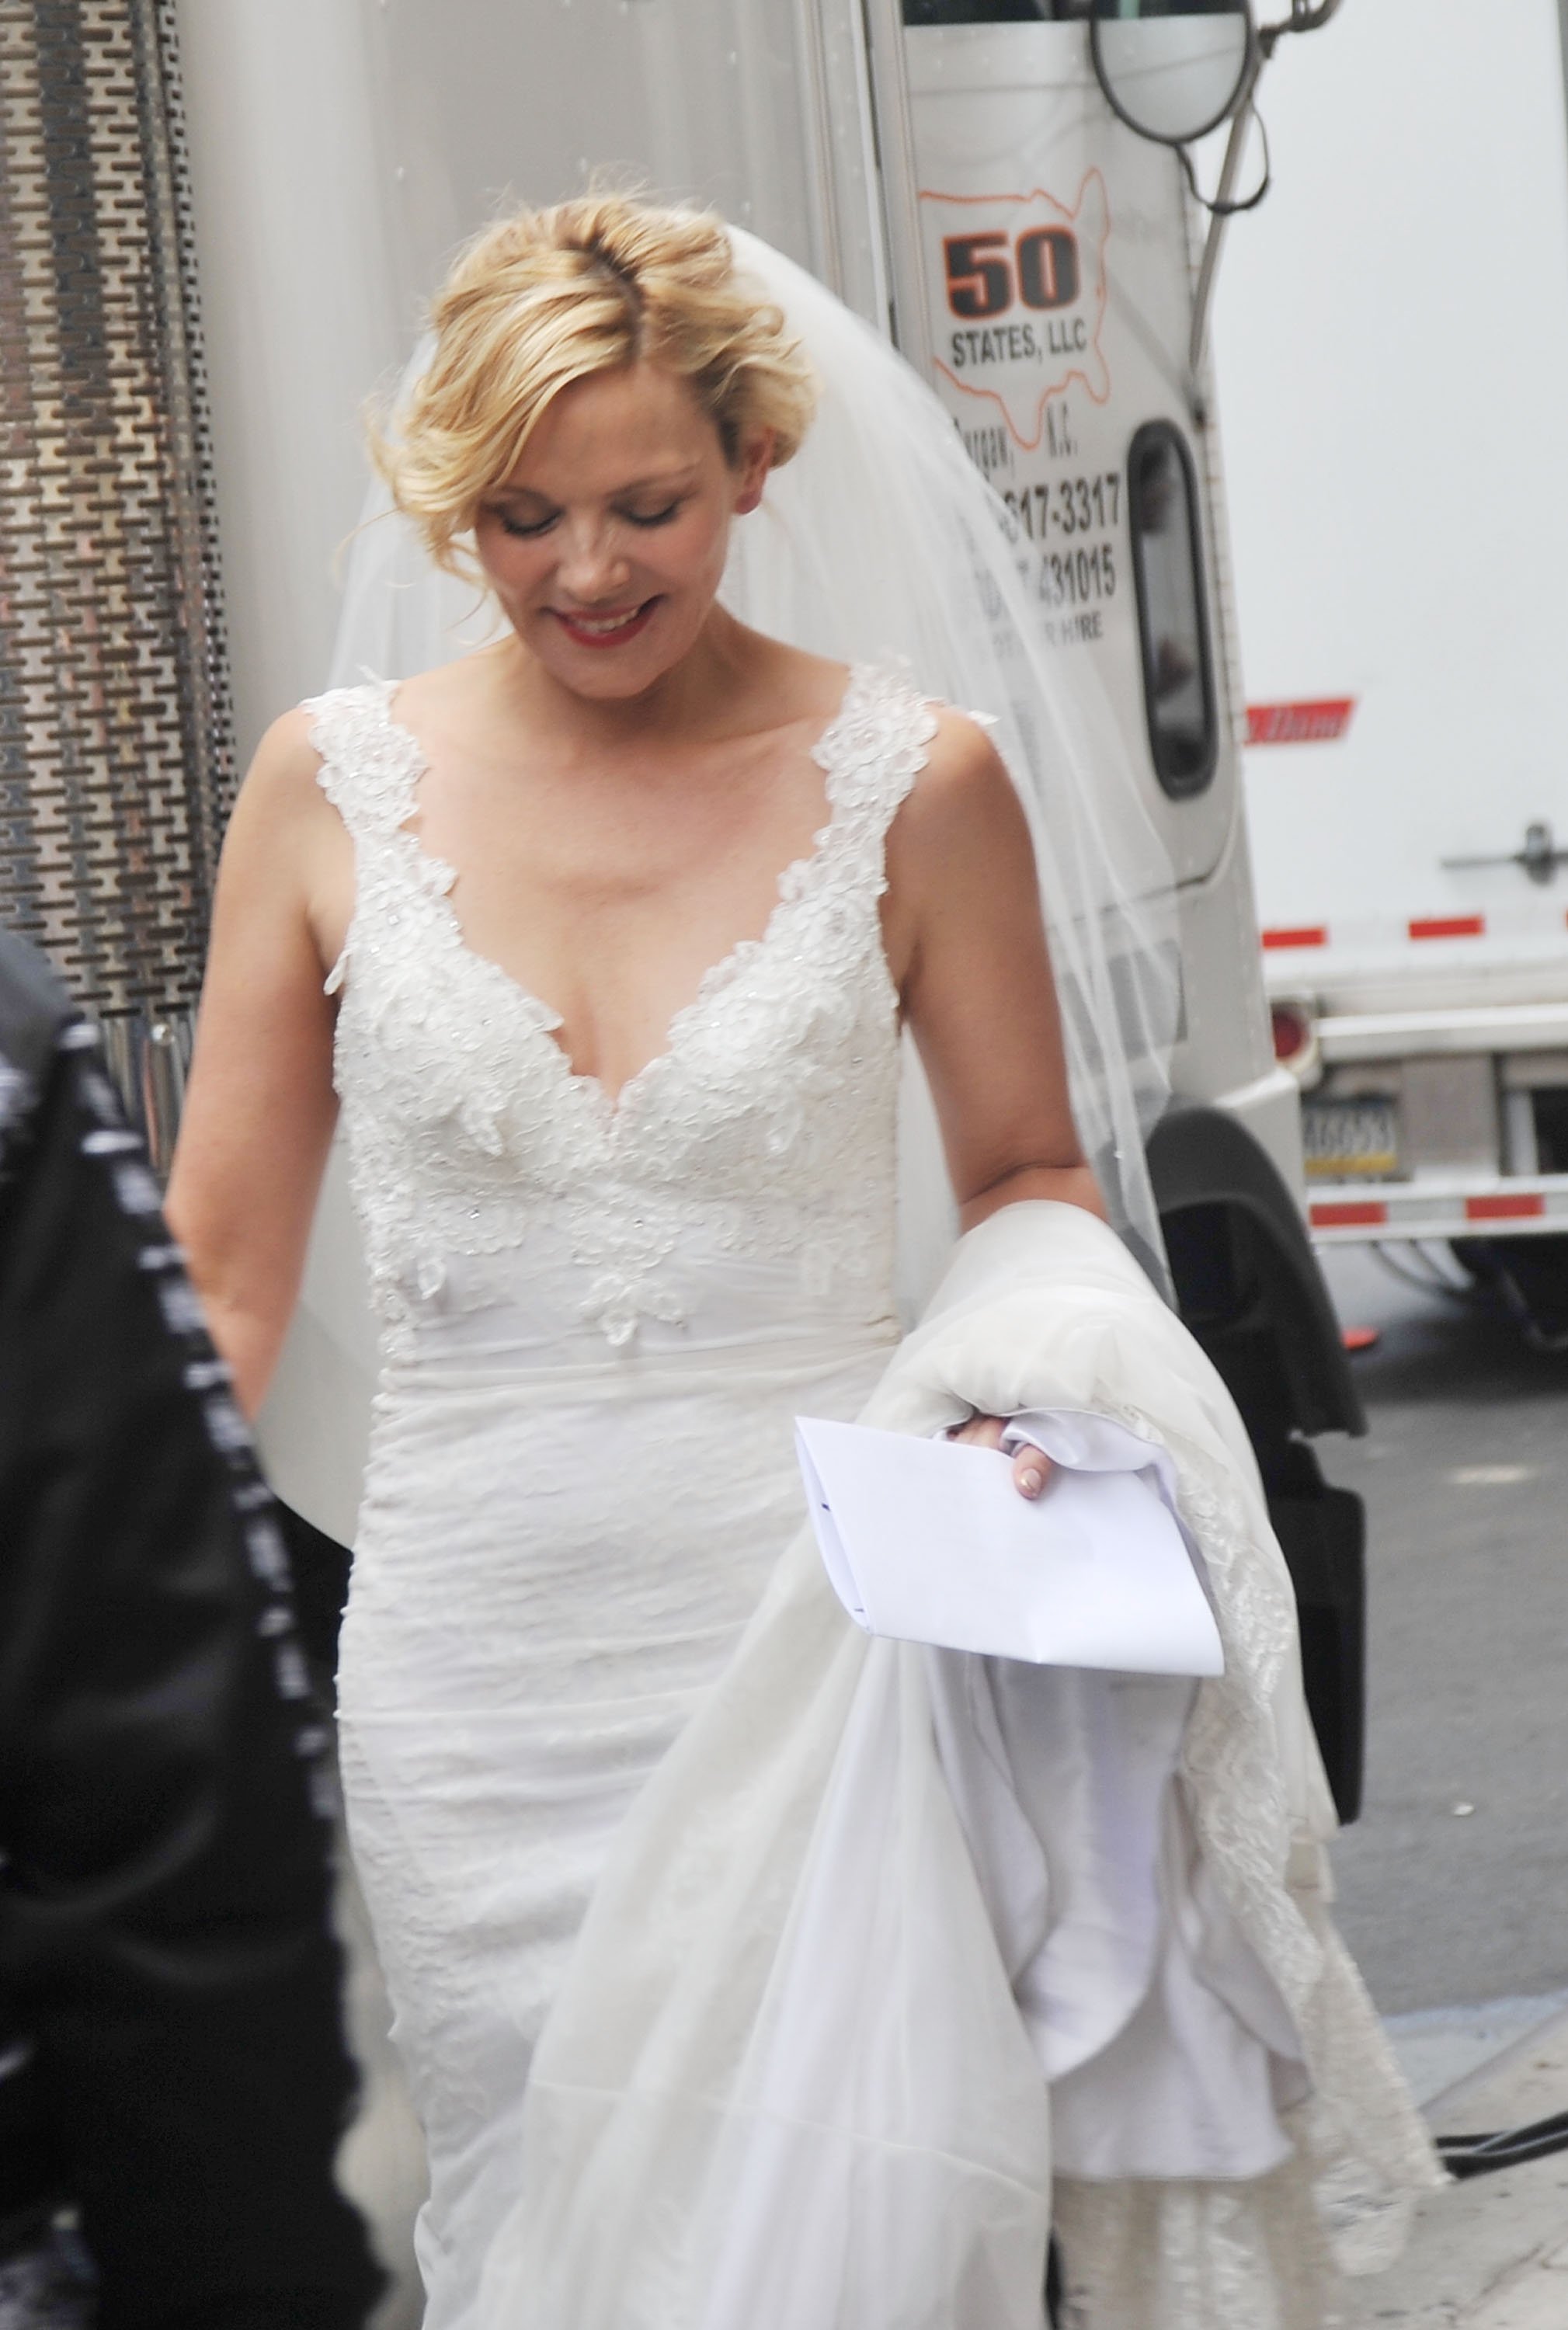 Kim Cattrall as Samantha Jones walks down a Manhattan street in a wedding dress during the filming of 'Sex and the City 2'